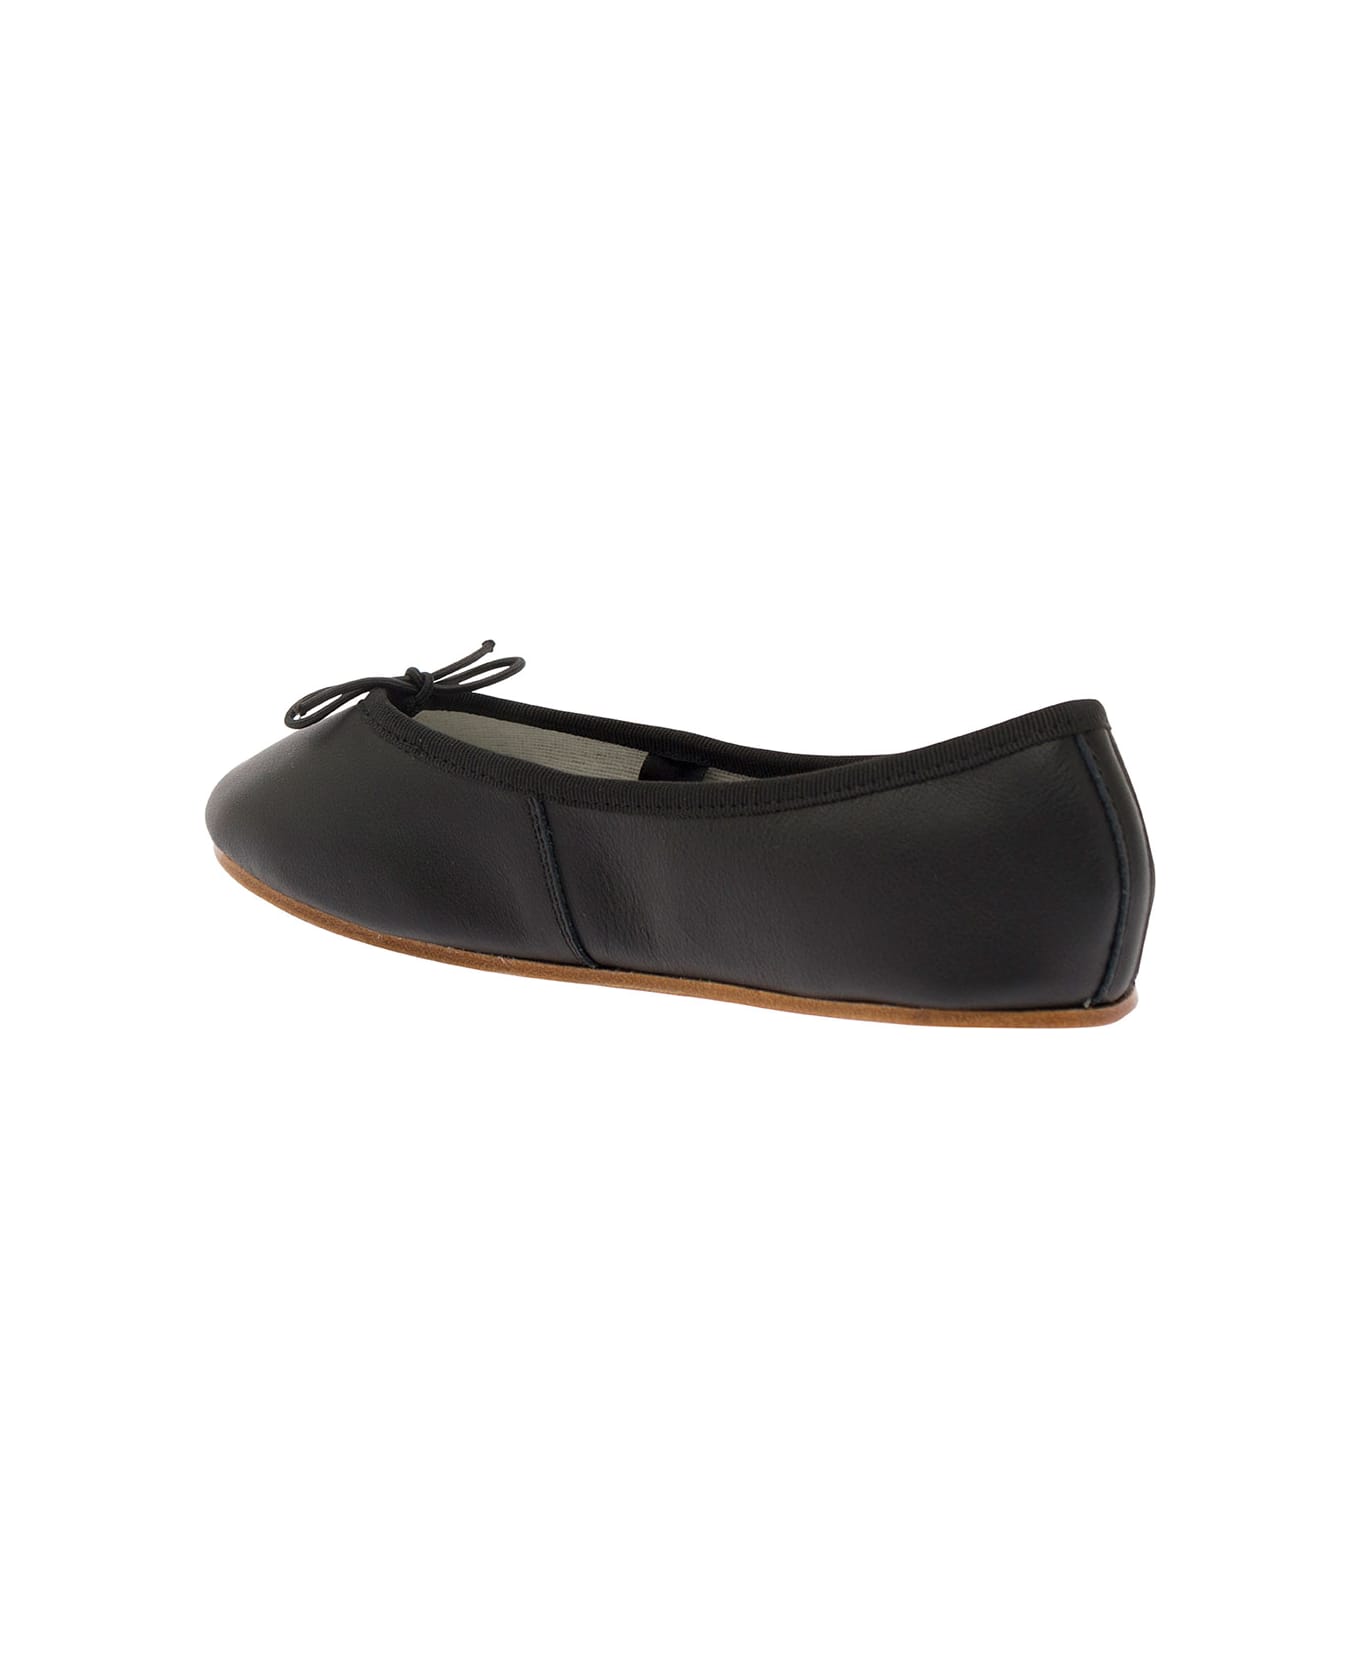 Repetto 'sofia' Black Ballet Flats With Ribbon In Leather Woman - Black フラットシューズ